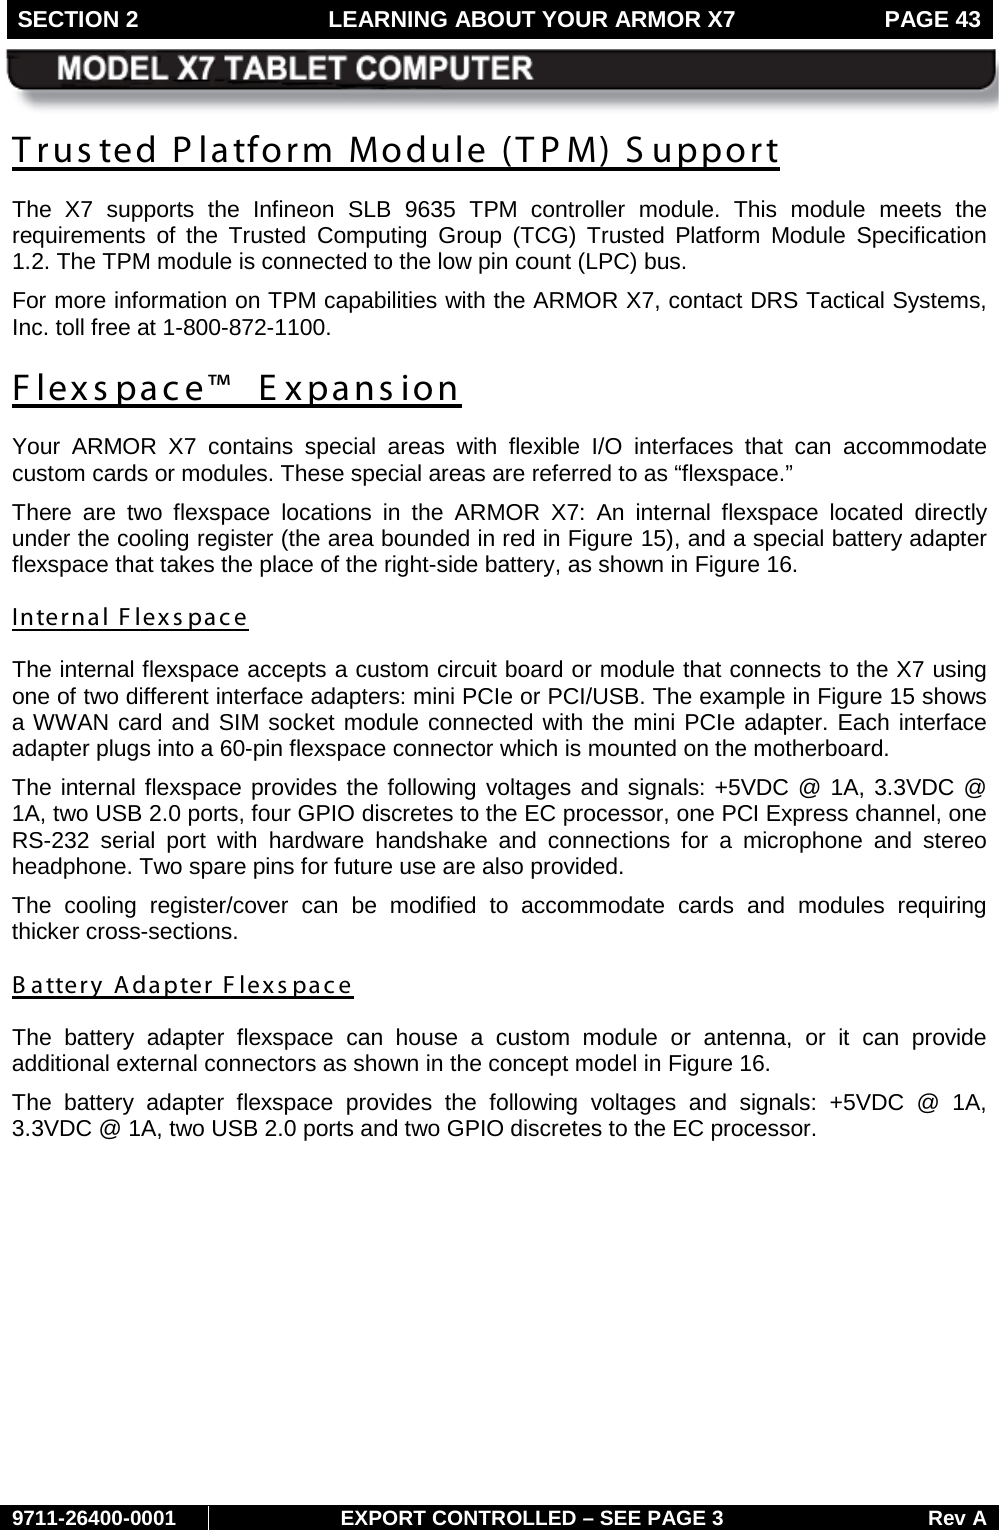 SECTION 2 LEARNING ABOUT YOUR ARMOR X7  PAGE 43        9711-26400-0001 EXPORT CONTROLLED – SEE PAGE 3 Rev A Trusted Platform Module (TPM) Support The X7 supports the Infineon SLB 9635 TPM controller module. This module  meets the requirements of the Trusted Computing Group (TCG) Trusted Platform Module Specification 1.2. The TPM module is connected to the low pin count (LPC) bus. For more information on TPM capabilities with the ARMOR X7, contact DRS Tactical Systems, Inc. toll free at 1-800-872-1100. Flexspace™  E xpans ion Your ARMOR X7 contains special areas with flexible I/O interfaces that can accommodate custom cards or modules. These special areas are referred to as “flexspace.”  There are two flexspace locations in the ARMOR X7: An internal flexspace located directly under the cooling register (the area bounded in red in Figure 15), and a special battery adapter flexspace that takes the place of the right-side battery, as shown in Figure 16. Internal Flexs pace The internal flexspace accepts a custom circuit board or module that connects to the X7 using one of two different interface adapters: mini PCIe or PCI/USB. The example in Figure 15 shows a WWAN card and SIM socket module connected with the mini PCIe adapter. Each interface adapter plugs into a 60-pin flexspace connector which is mounted on the motherboard.  The internal flexspace provides the following voltages and signals: +5VDC @ 1A, 3.3VDC @ 1A, two USB 2.0 ports, four GPIO discretes to the EC processor, one PCI Express channel, one RS-232 serial port with hardware handshake and connections for a microphone and stereo headphone. Two spare pins for future use are also provided. The cooling register/cover can be modified to accommodate cards and modules requiring thicker cross-sections. B attery Adapter Flexs pace The  battery  adapter flexspace can house a custom module or  antenna,  or it can  provide additional external connectors as shown in the concept model in Figure 16. The battery adapter flexspace provides the following voltages and signals: +5VDC @ 1A, 3.3VDC @ 1A, two USB 2.0 ports and two GPIO discretes to the EC processor.  